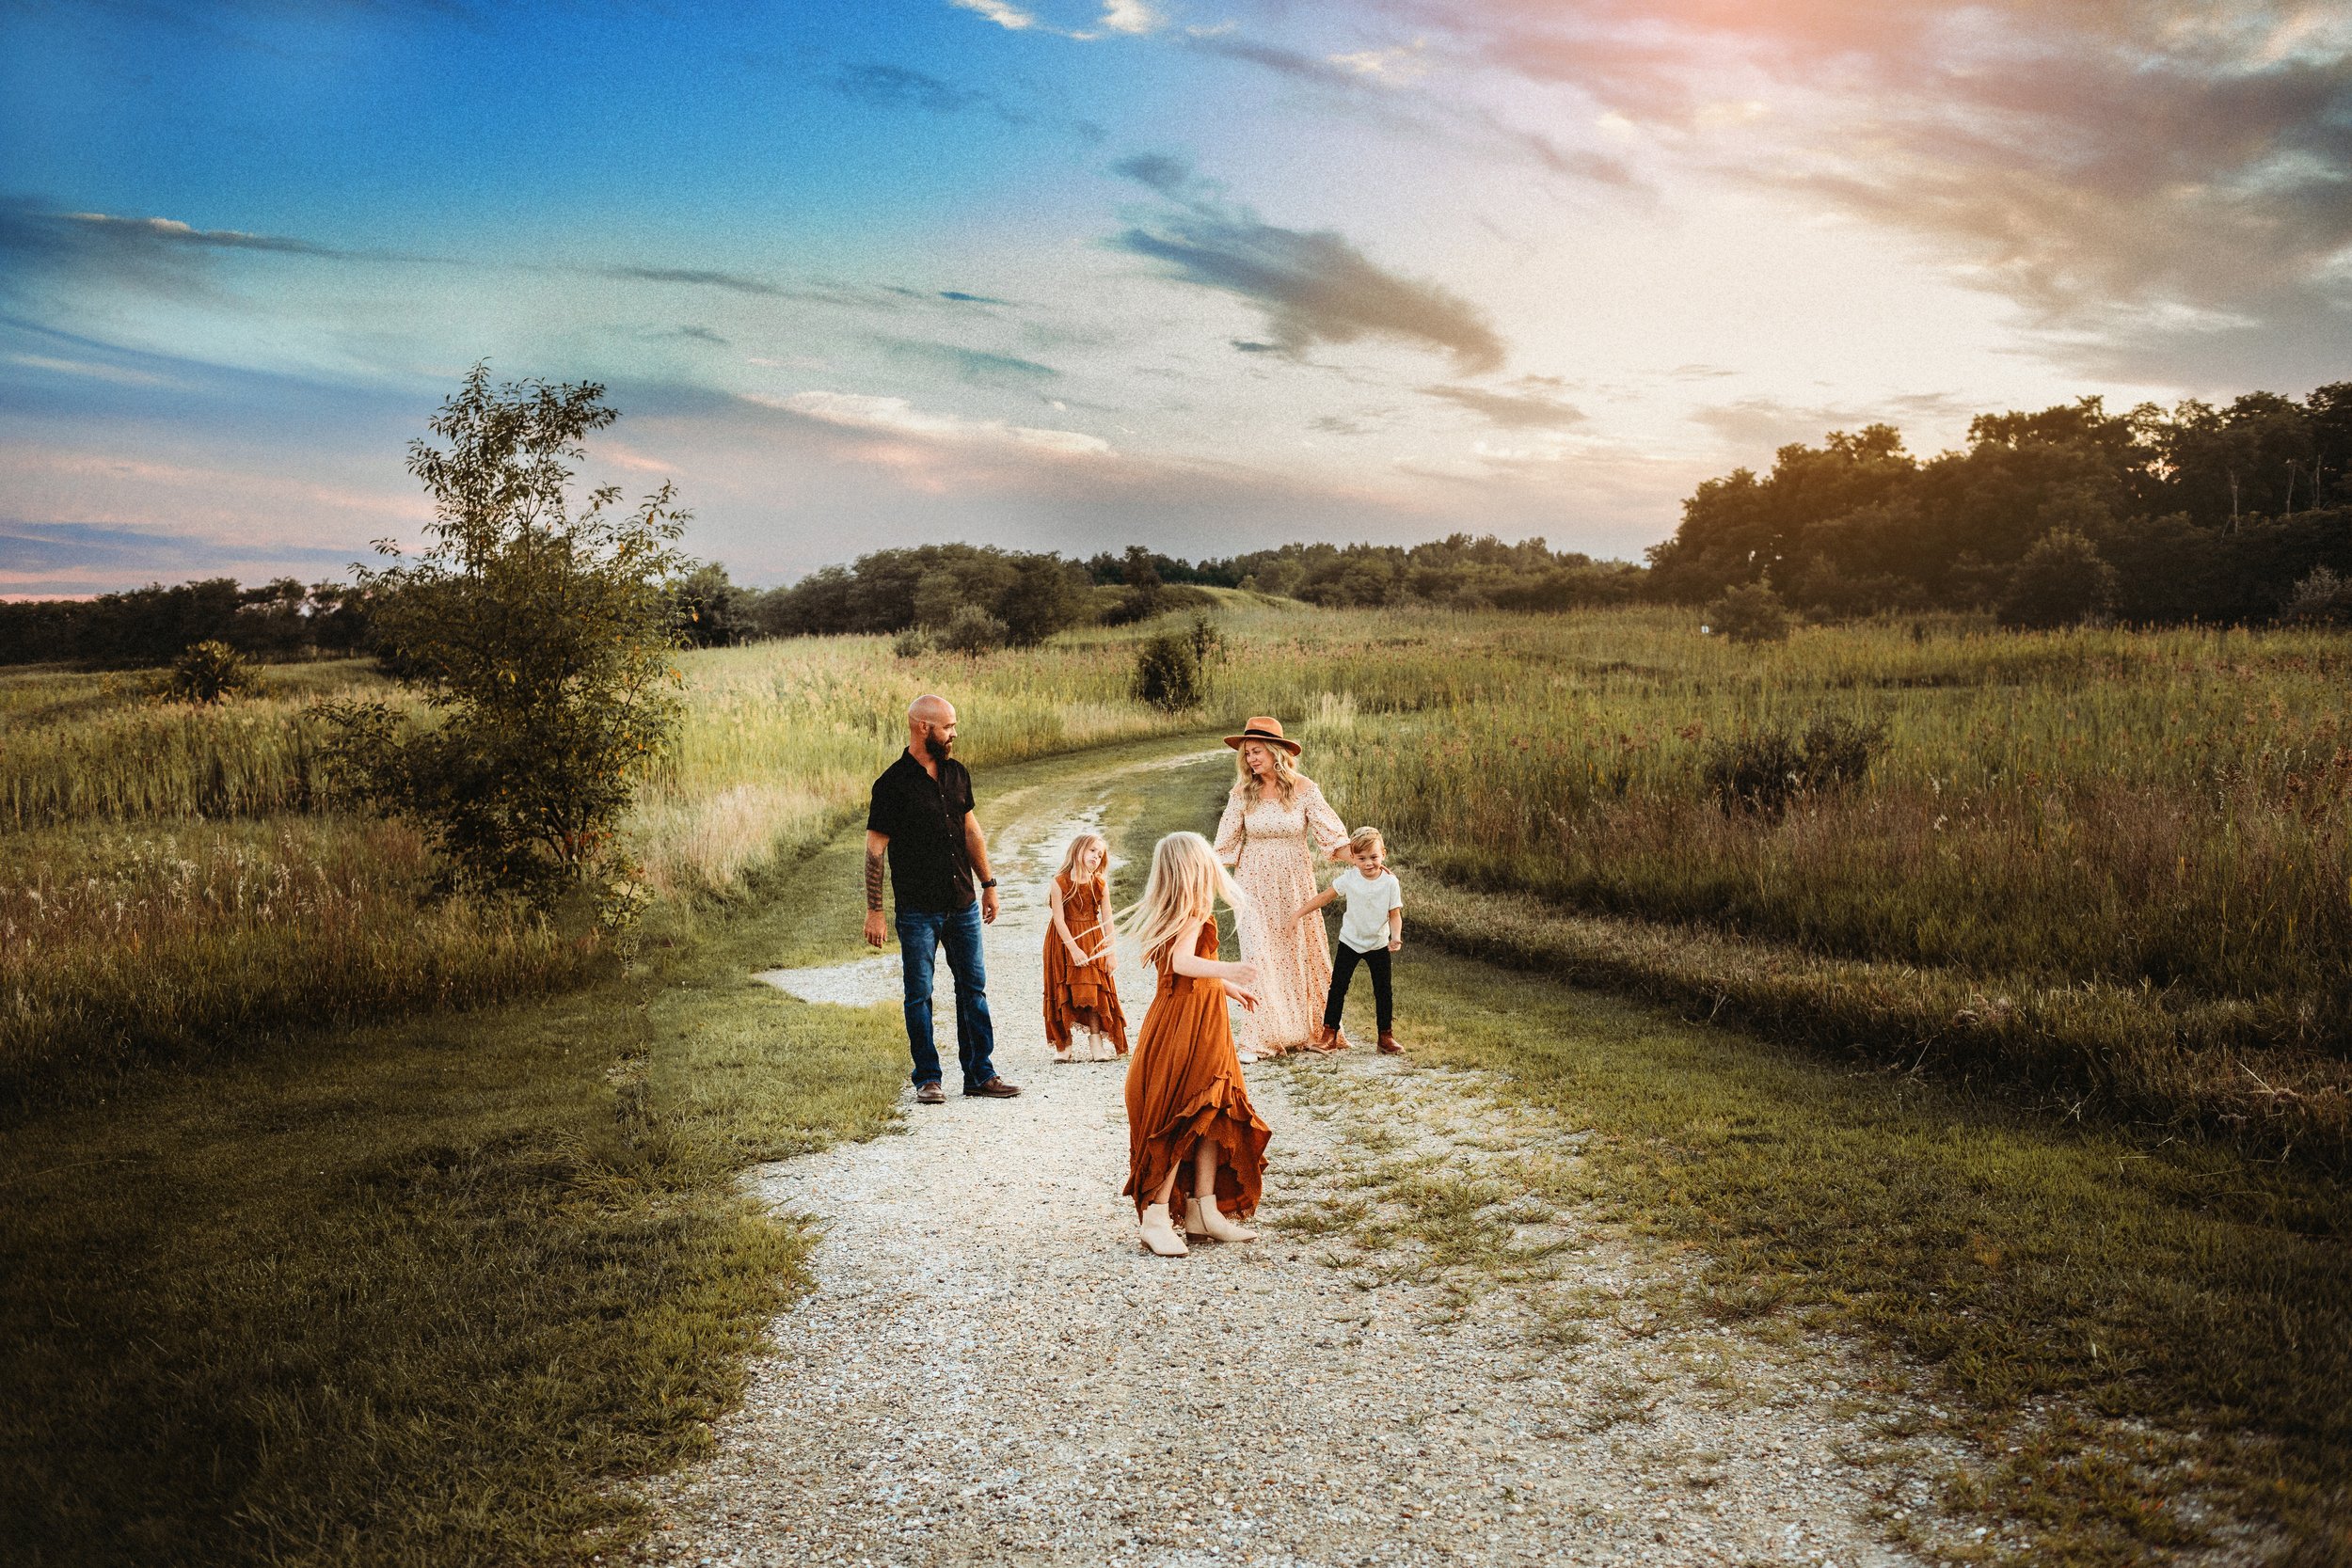  In a grass field in Illinois, a family of five plays a game together captured by Teala Ward Photography. moody family pics #TealaWardPhotography #IllinoisValleyPhotographer #midwestphotography #TealaWardFamilies #Illinoisfamilypictures 